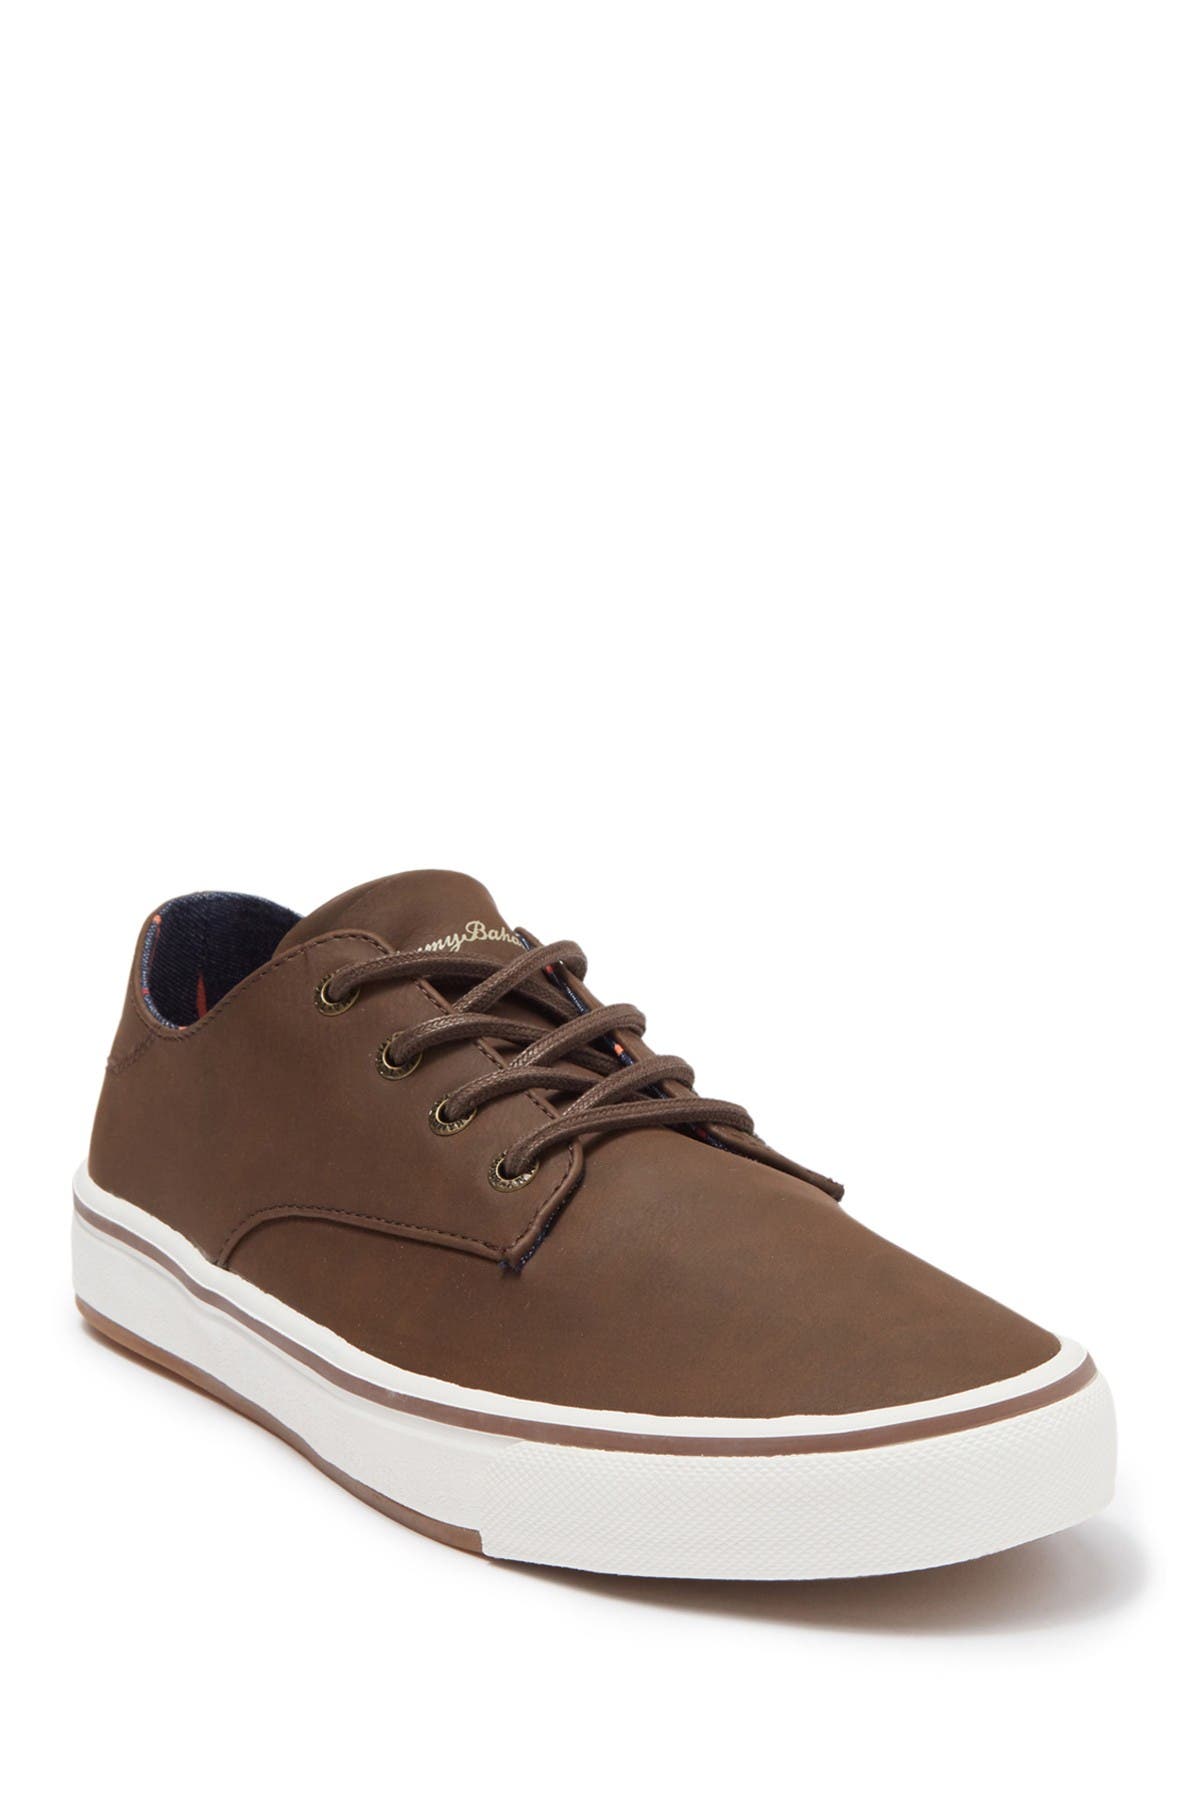 tommy bahama sneakers